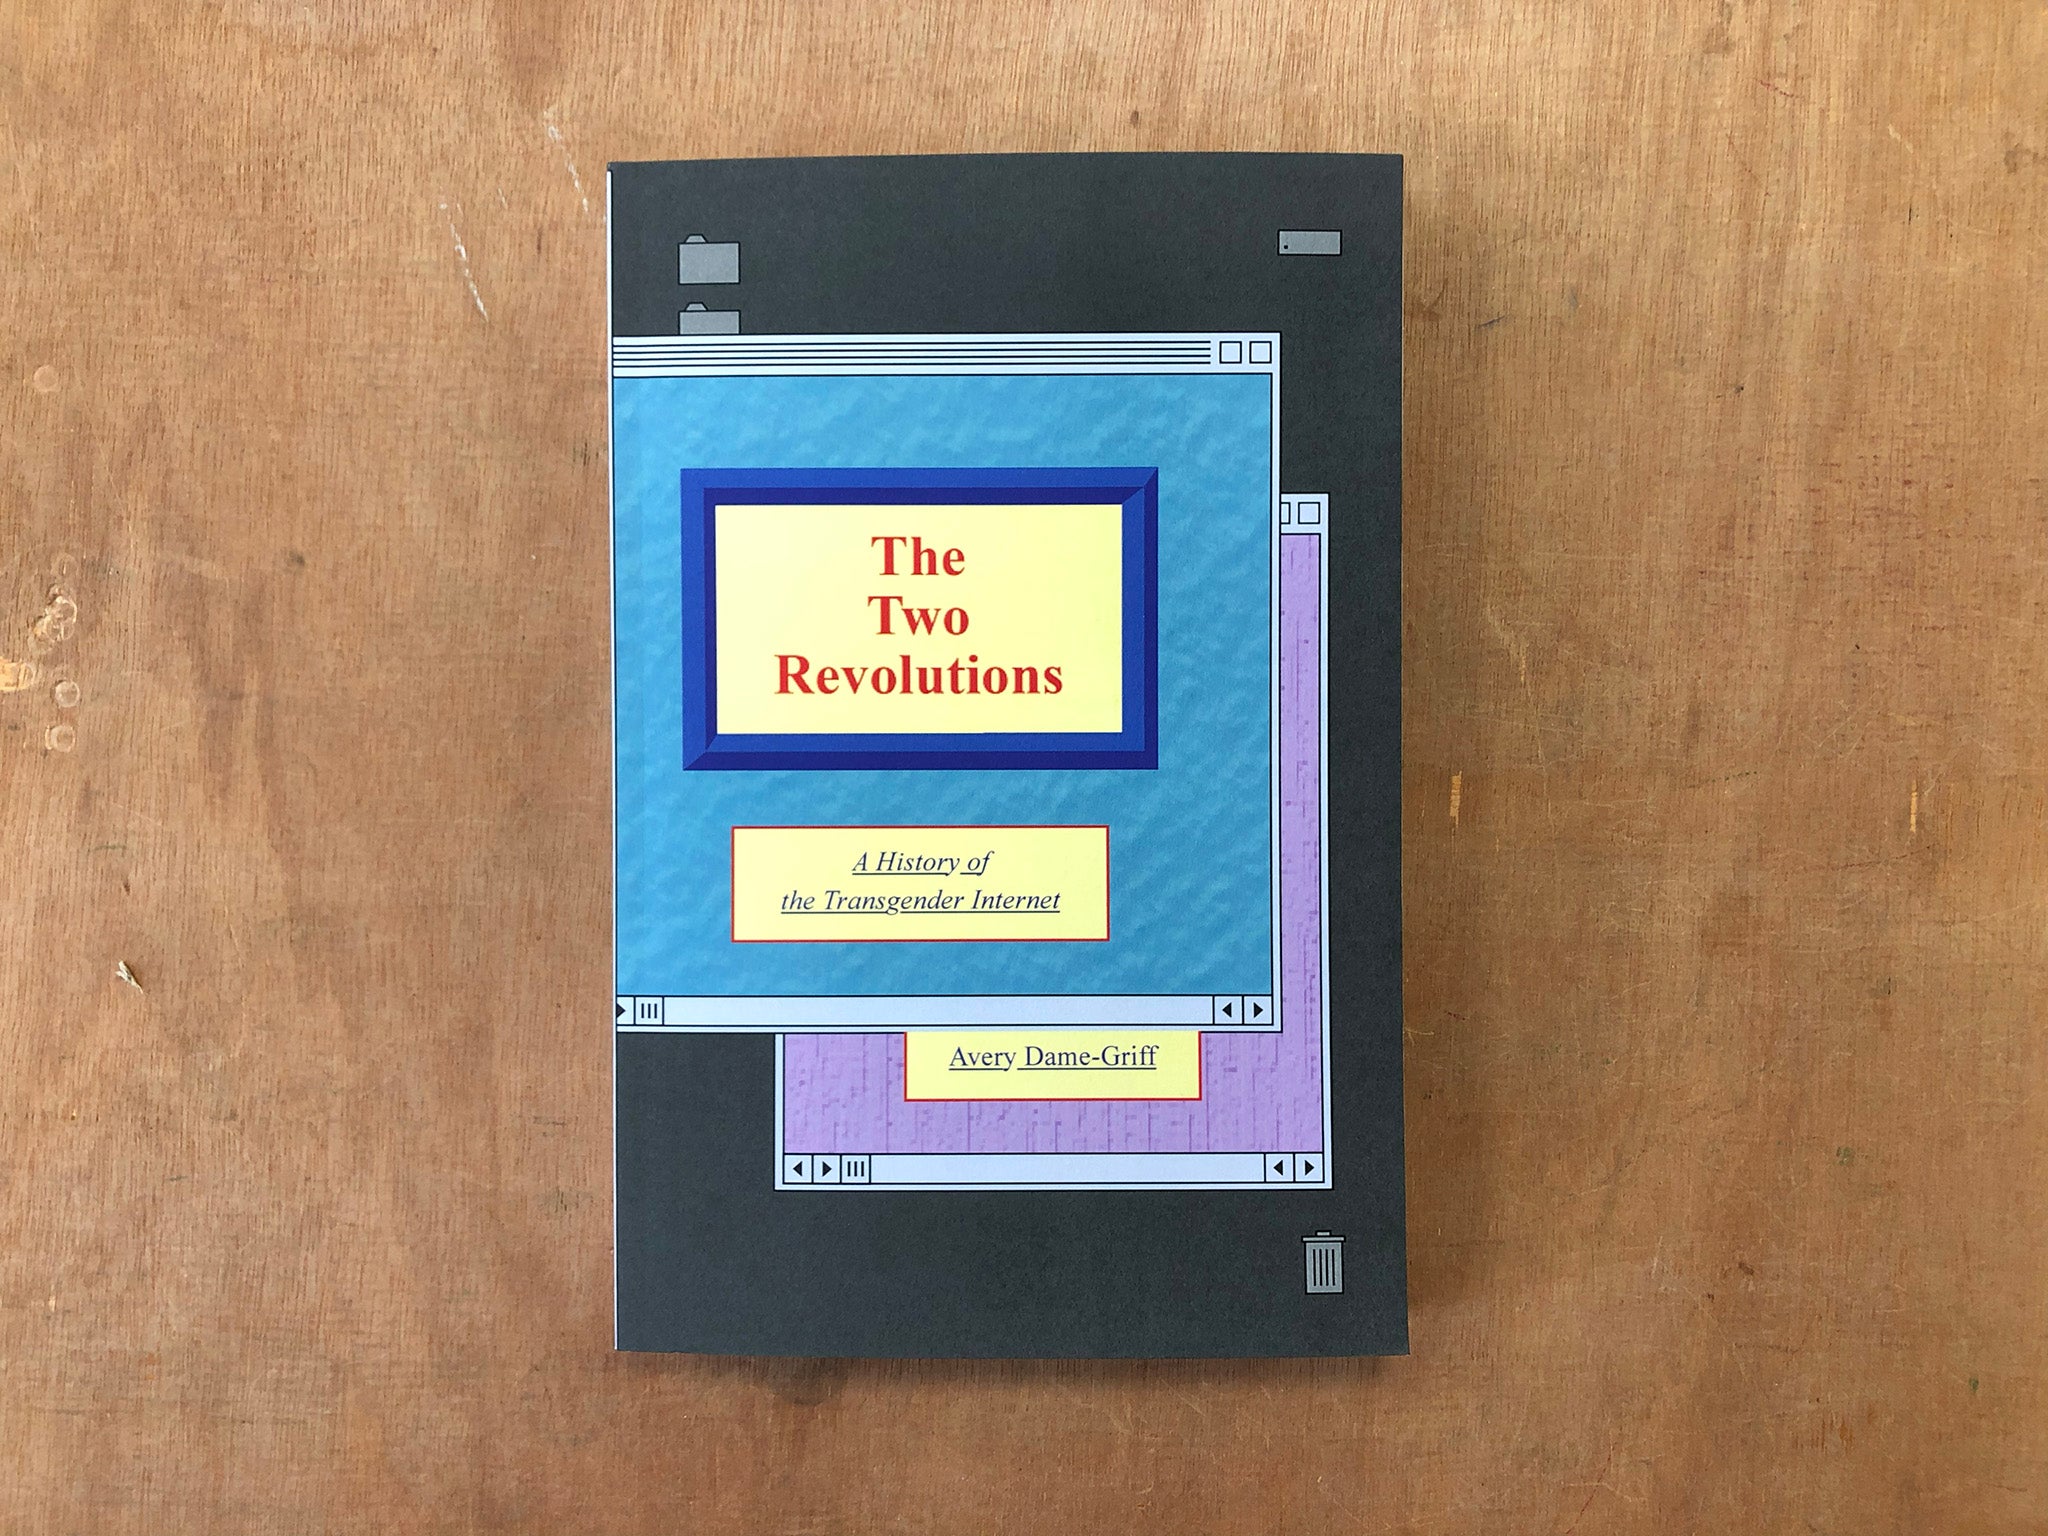 THE TWO REVOLUTIONS: A HISTORY OF THE TRANSGENDER INTERNET by Avery Dame-Griff